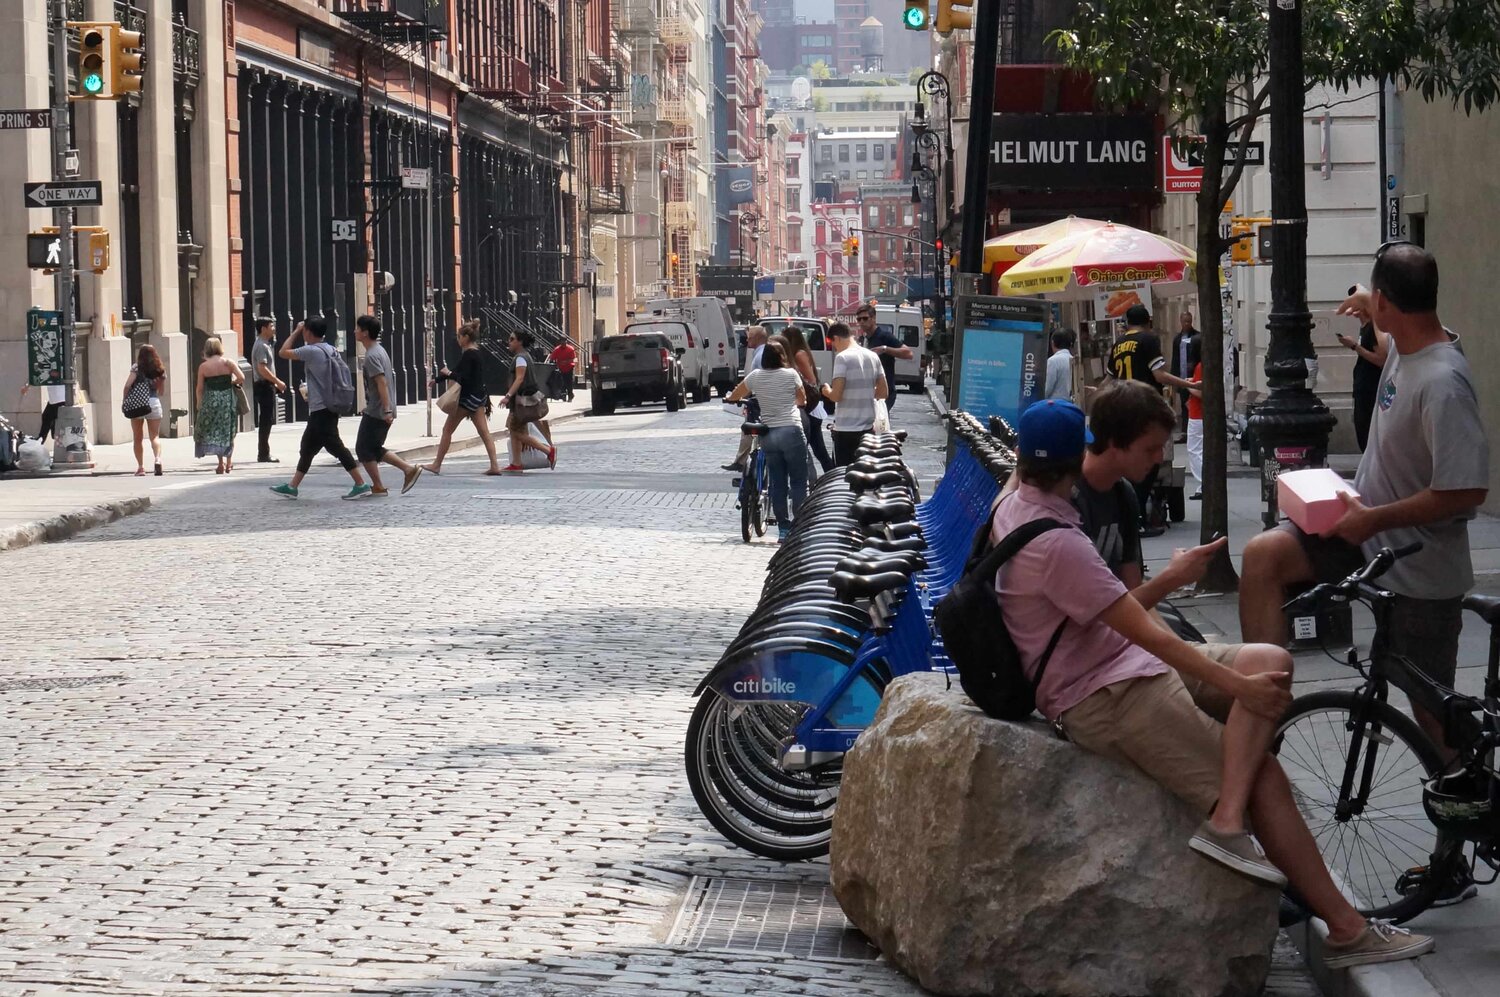 All manner of objects can become part of making a street “sticky,” i.e. a street that convinces people to gather and stay rather than just walk by. Clustering them by building entrances can support both businesses and users.